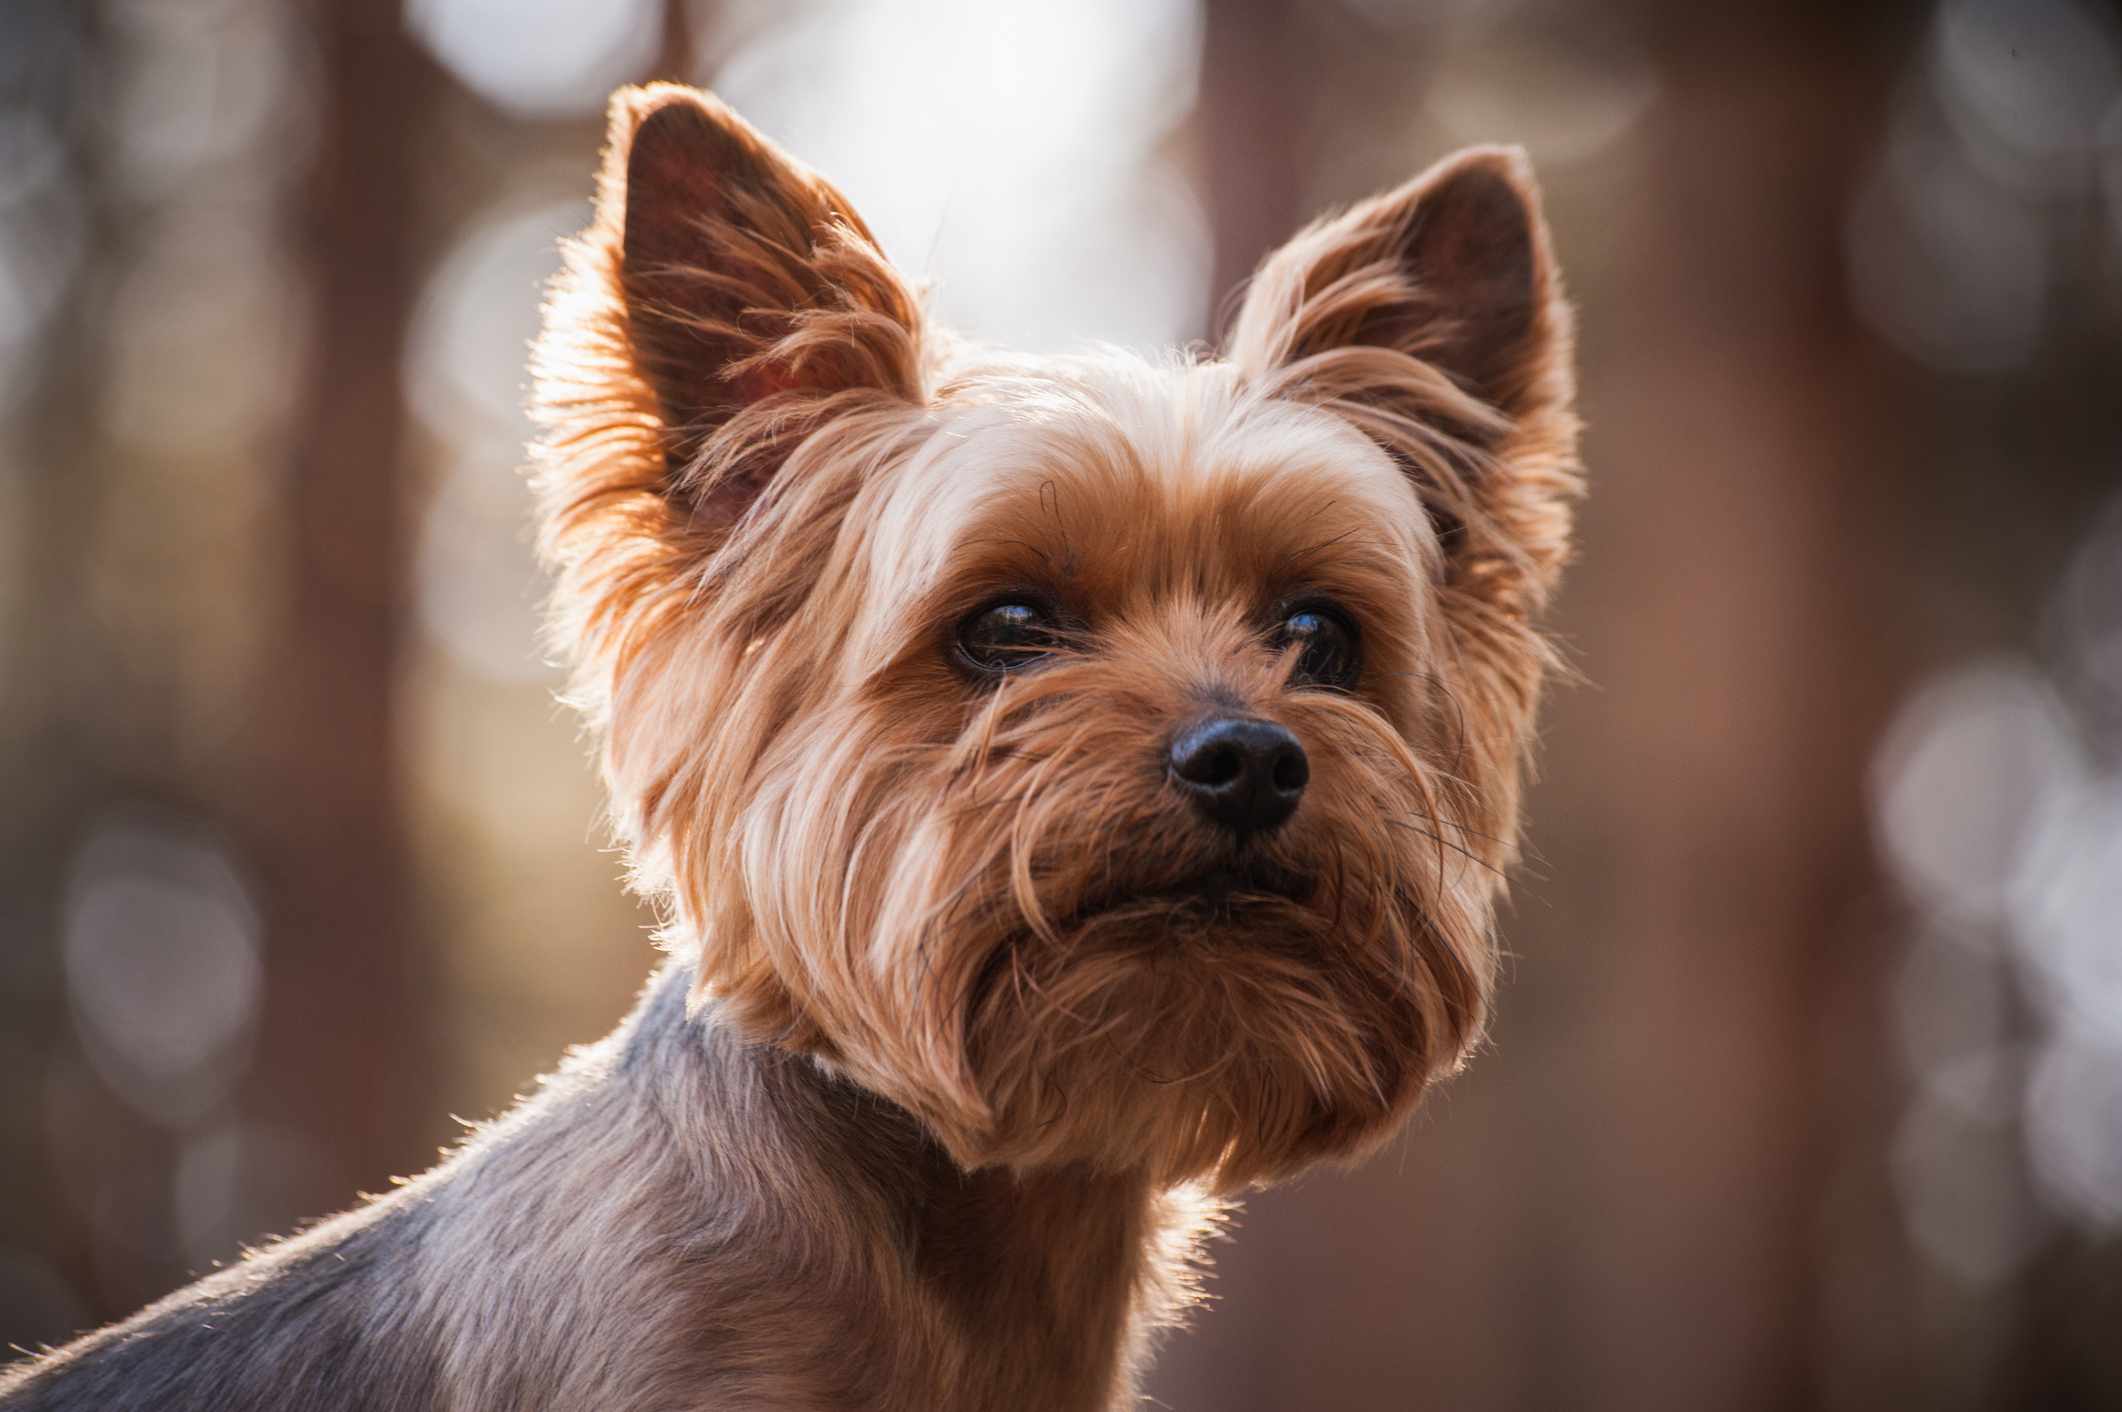 Close up head shot of a Yorkshire Terrier